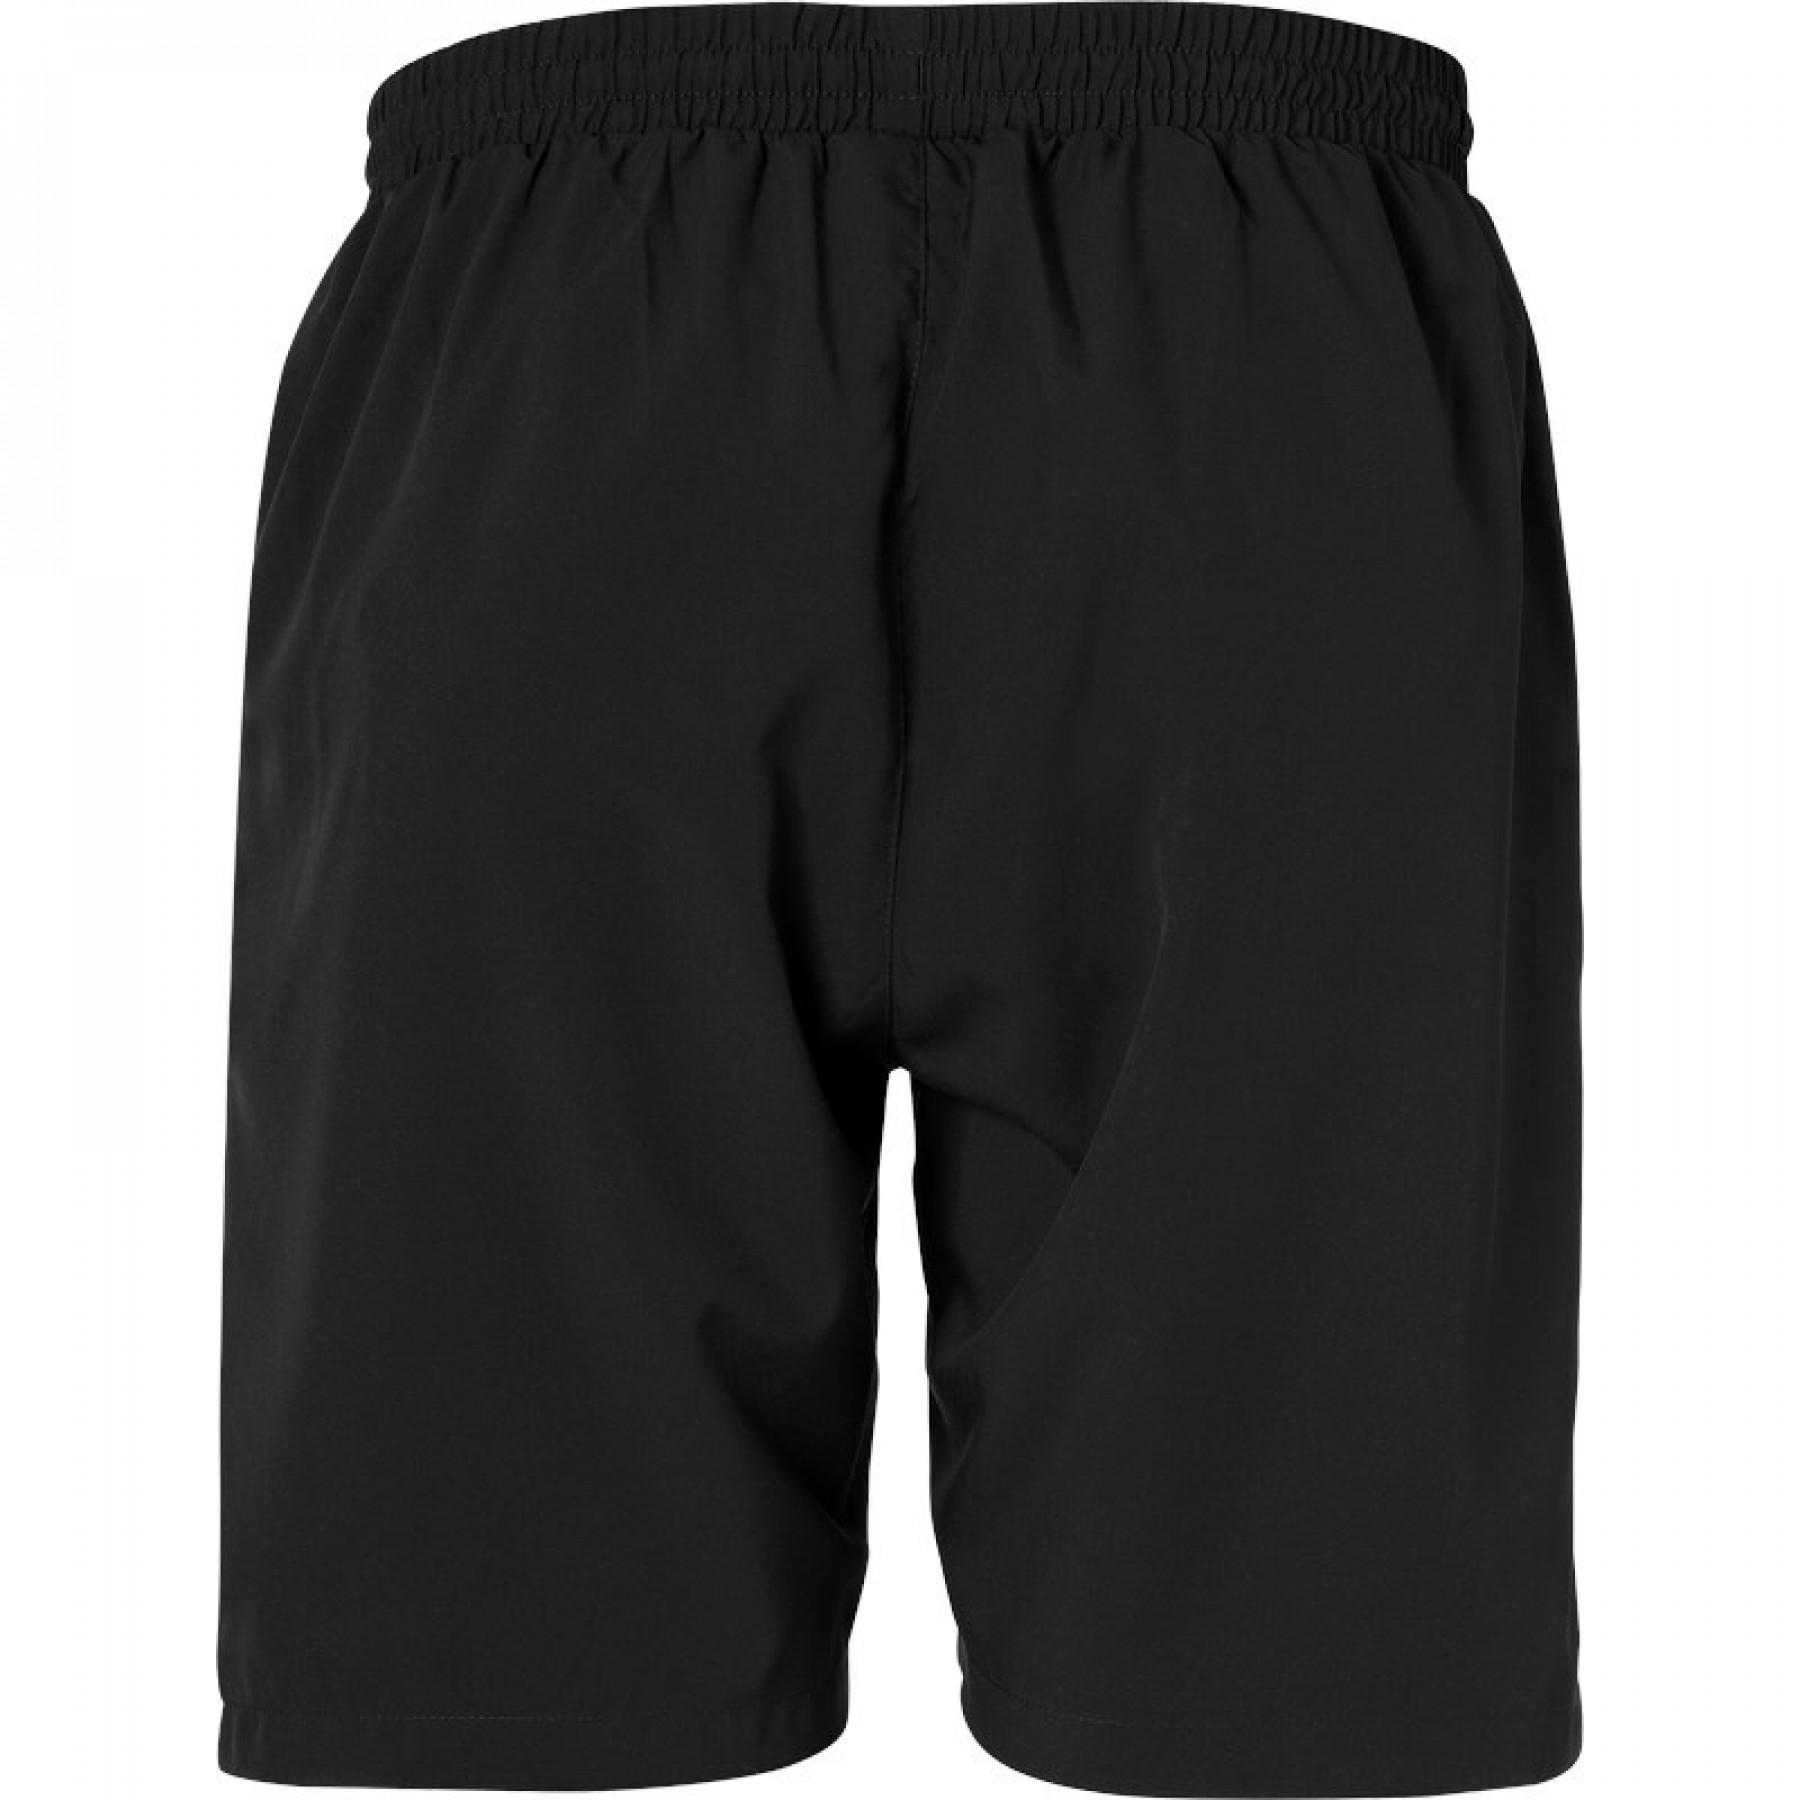 Shorts Uhlsport Essential Woven